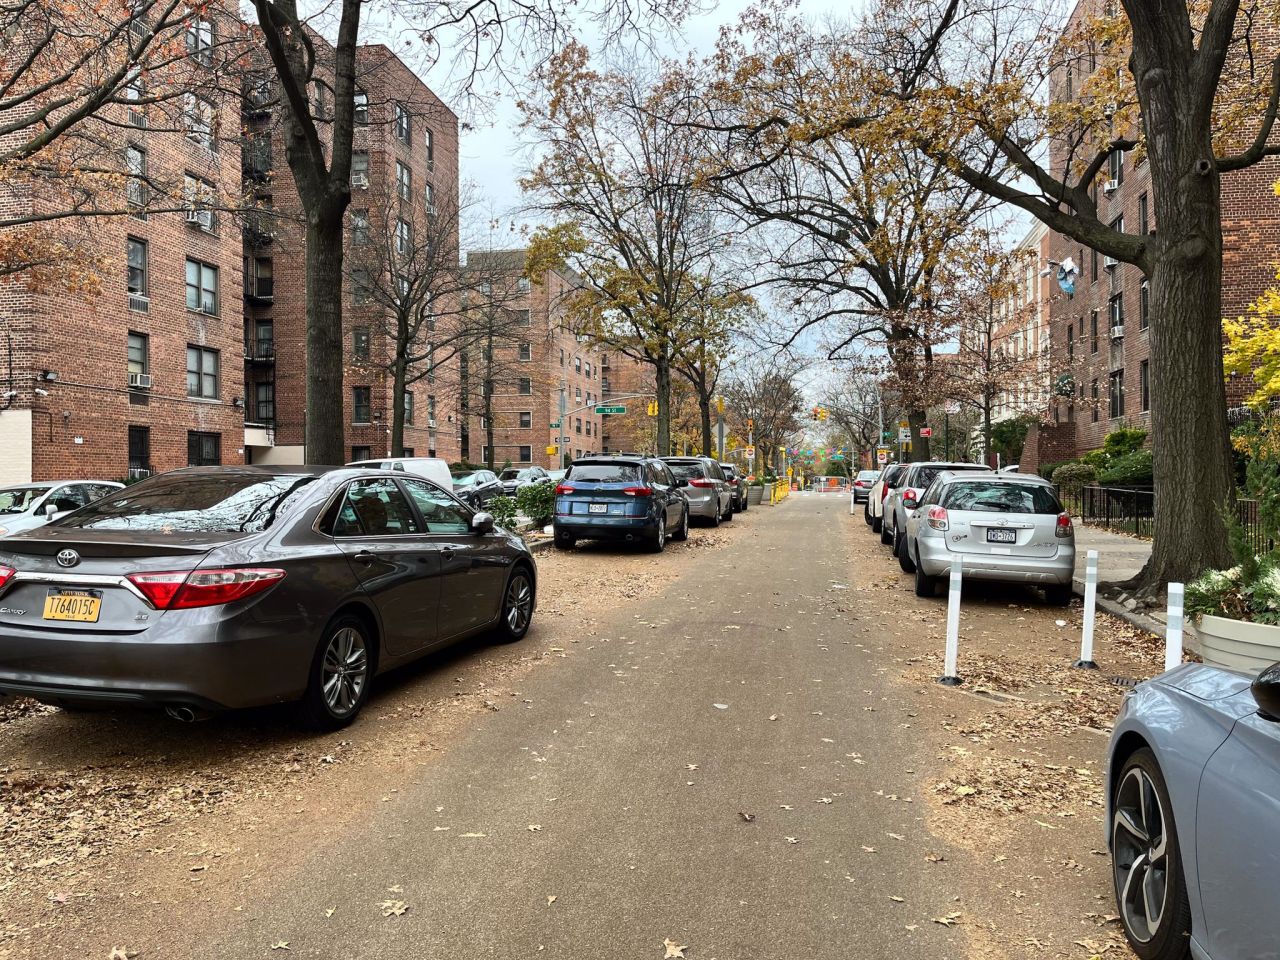 All the cars on the left are illegally parked. Parking on the right side is also illegal, but DOT has not replaced the signs yet. Photo: Tipster